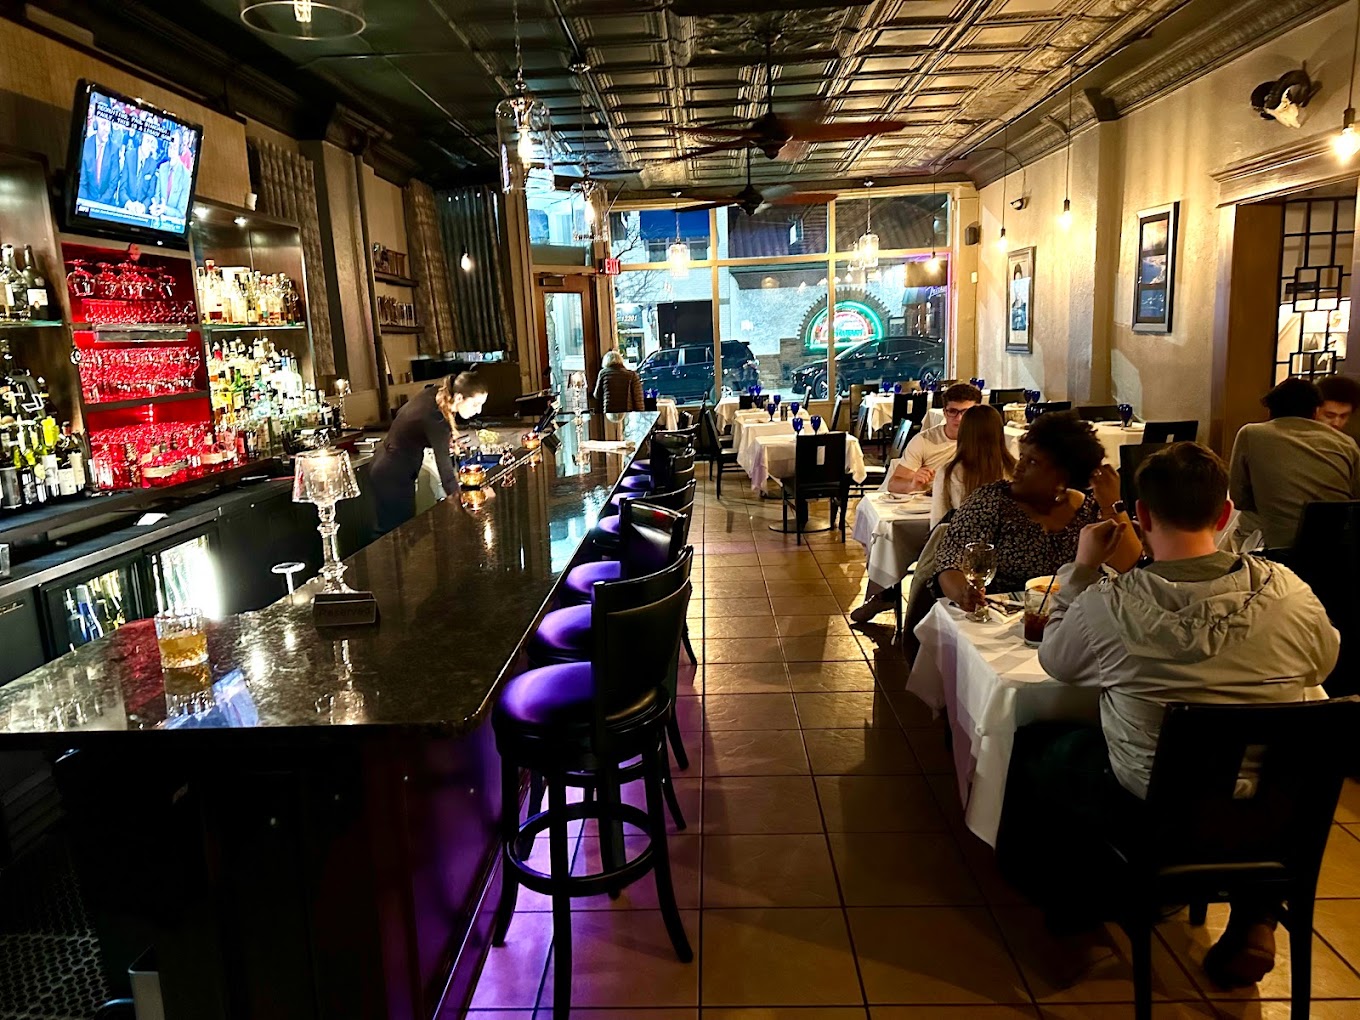 Mia Bella Restaurant: A Culinary Haven in Cleveland’s Little Italy